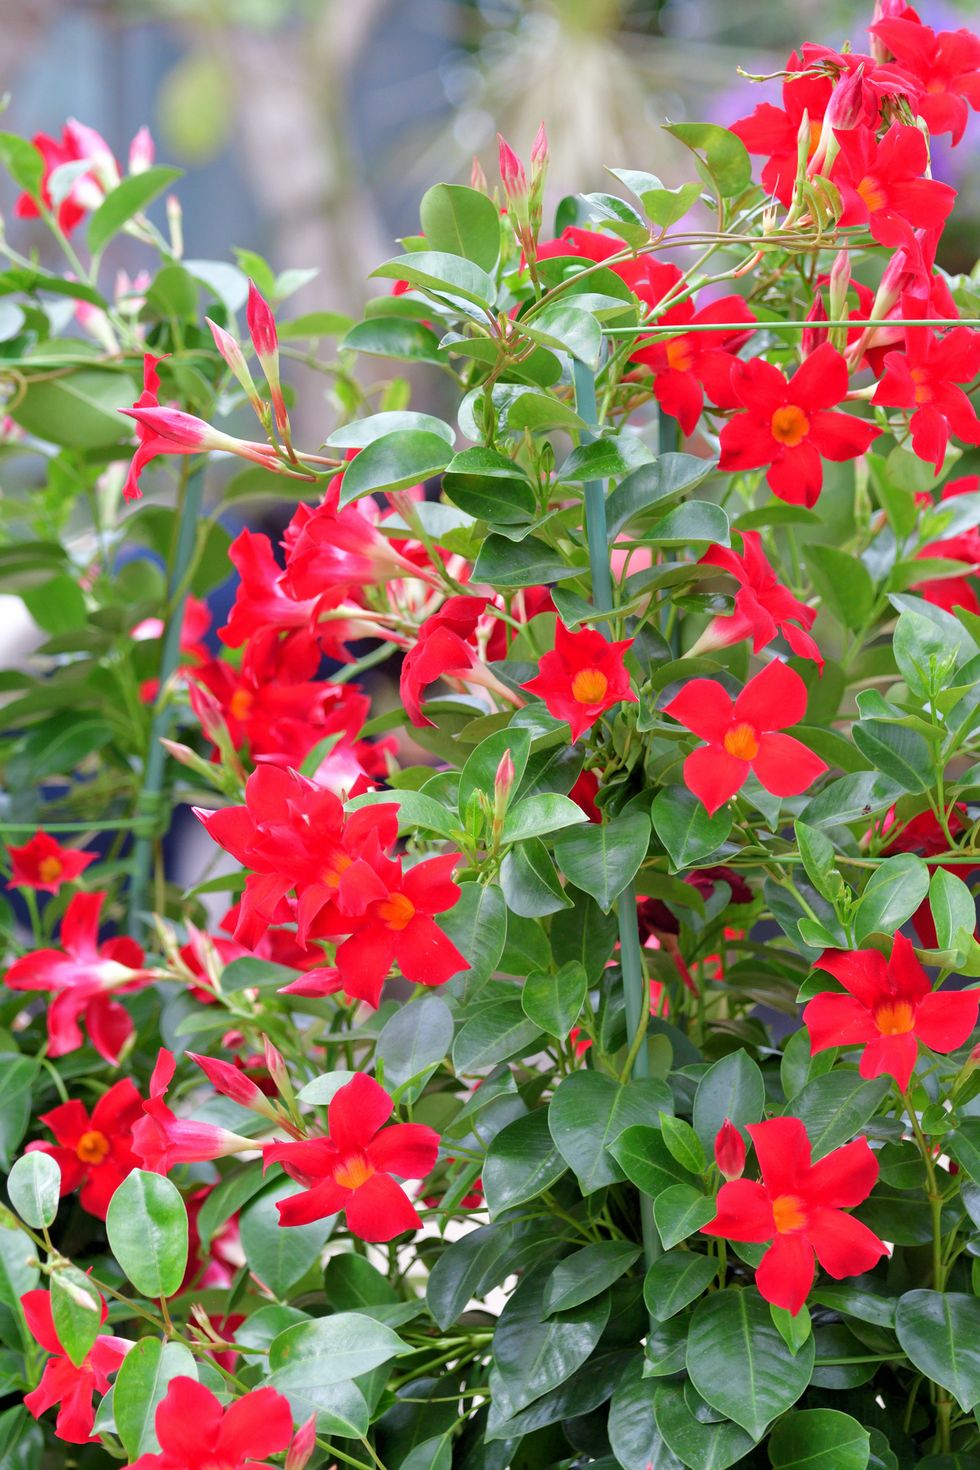 6 Charming Climbing Vines and Flowering Plants to Add to Your Garden